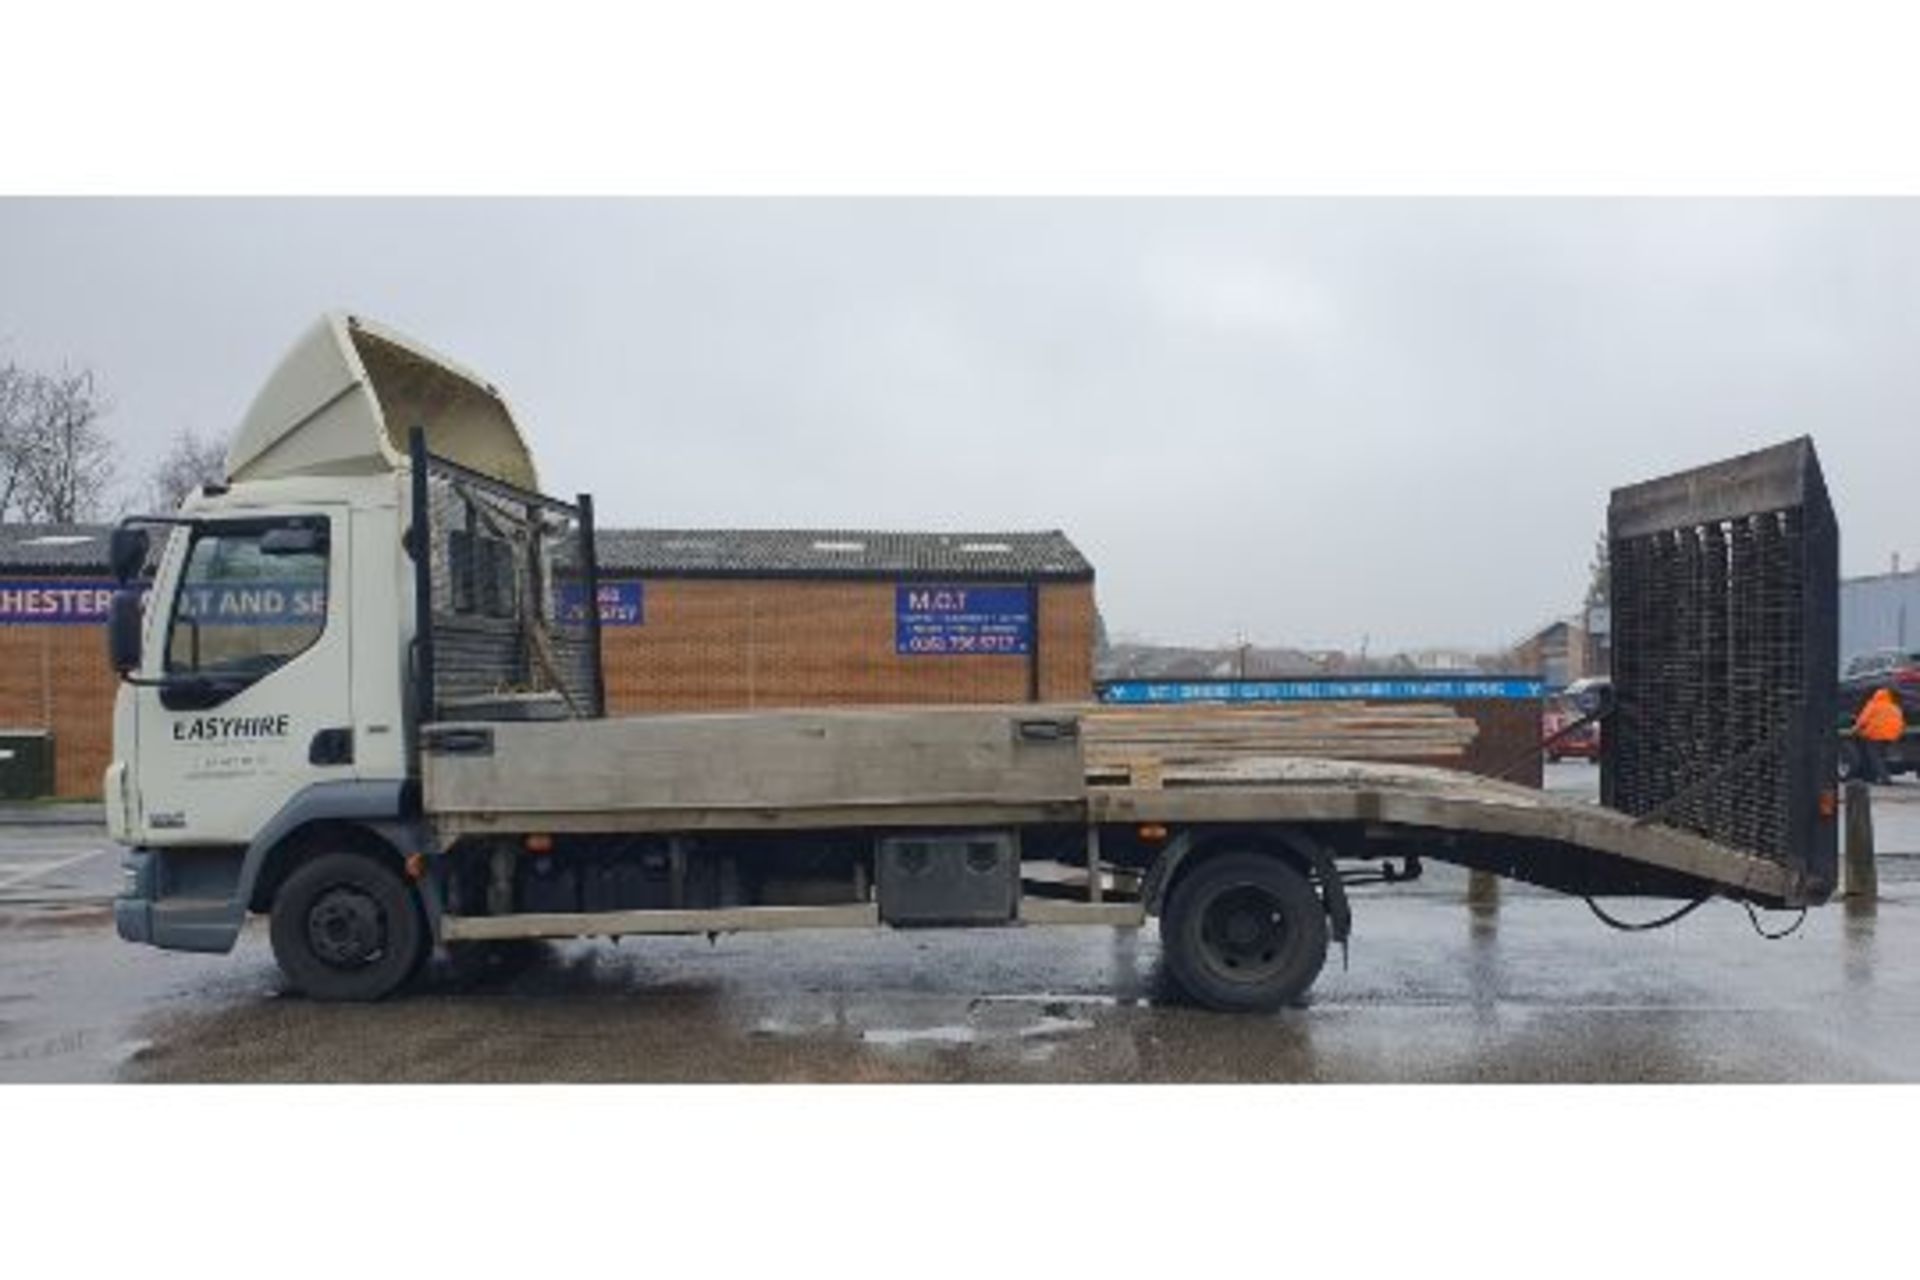 DAF LF 45.160 Flatbed Lorry w/ Loading Ramp & Electric Winch | DIG 4987 | 494,328km | *Non Runner* - Image 5 of 22